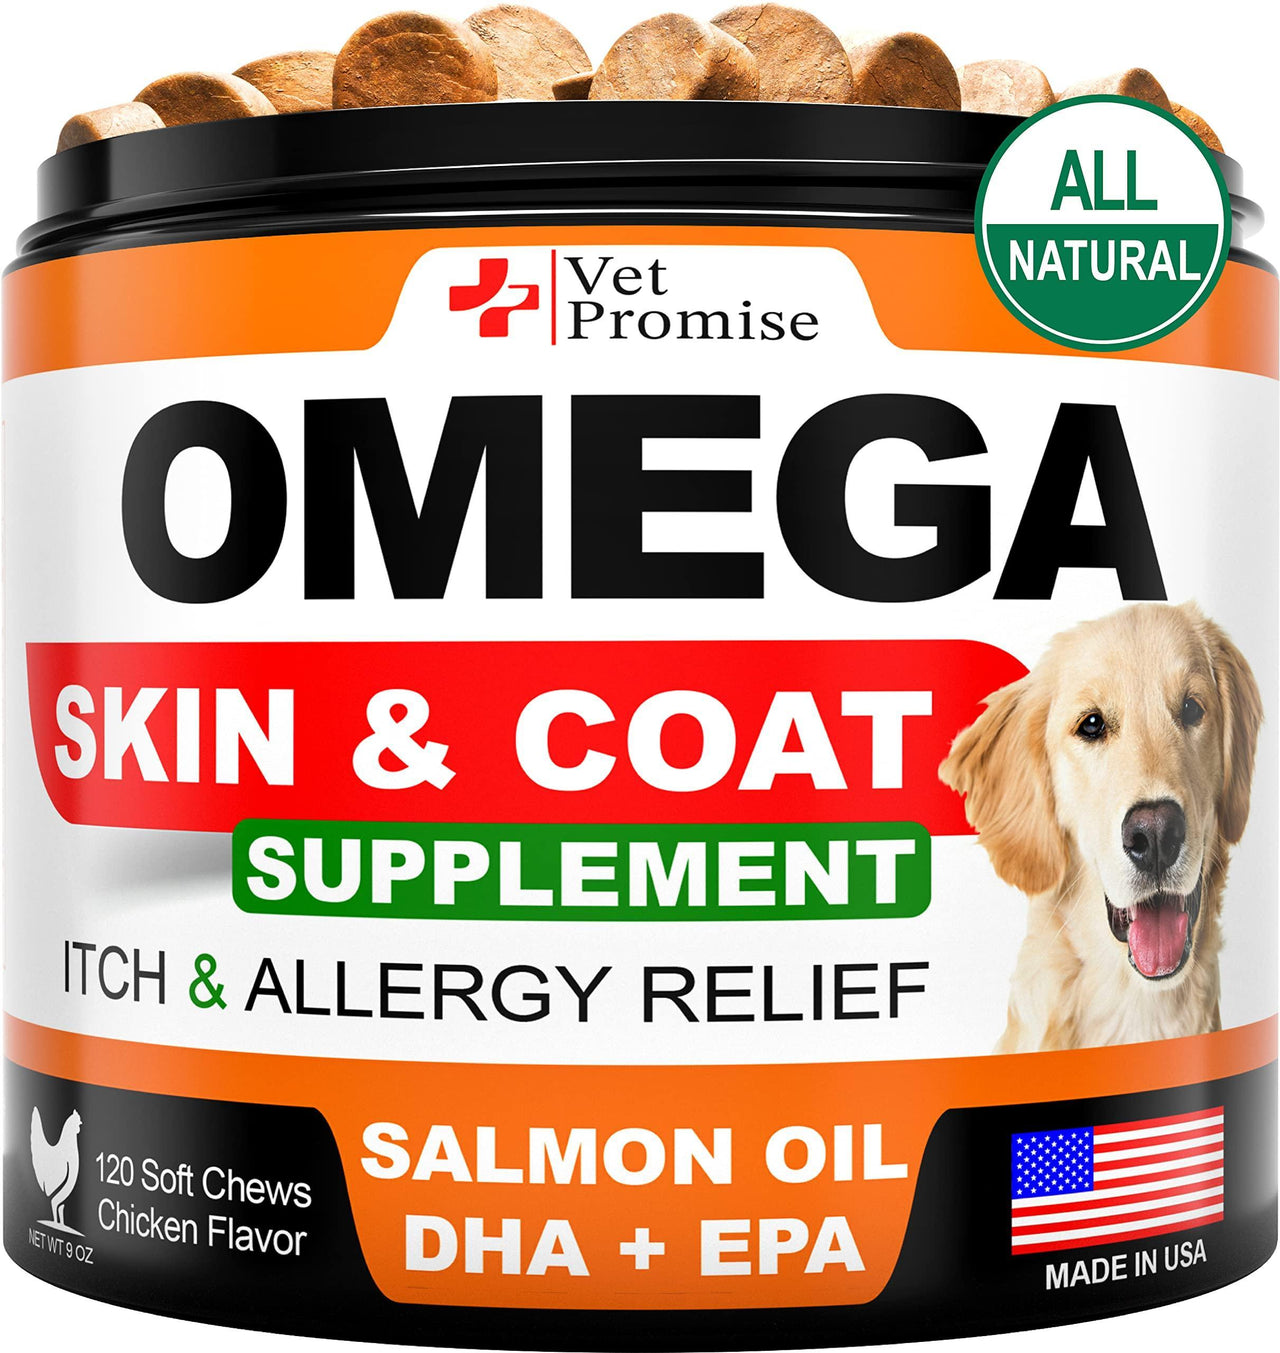 Omega 3 for Dogs   Dog Skin and Coat Supplement   Fish Oil for Dogs - Mercantile Mountain